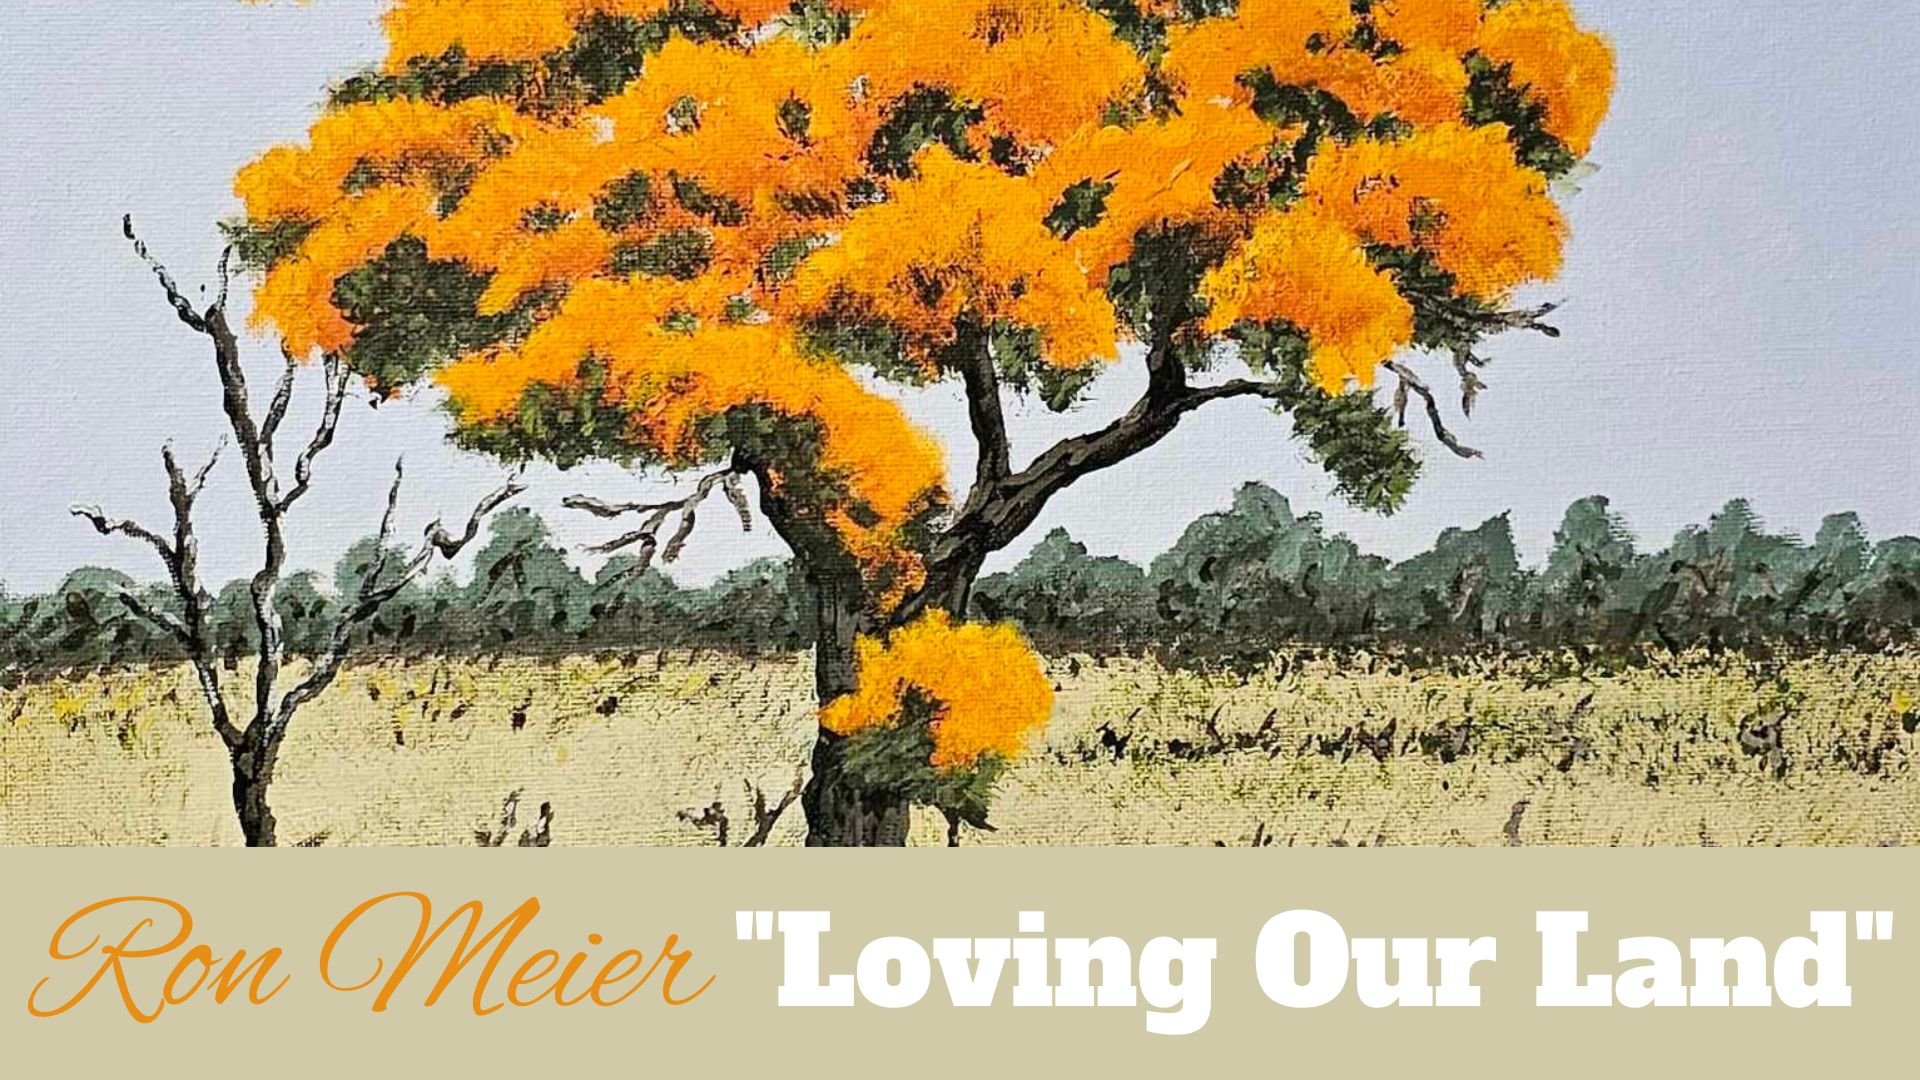 Exhibition: Loving our Land